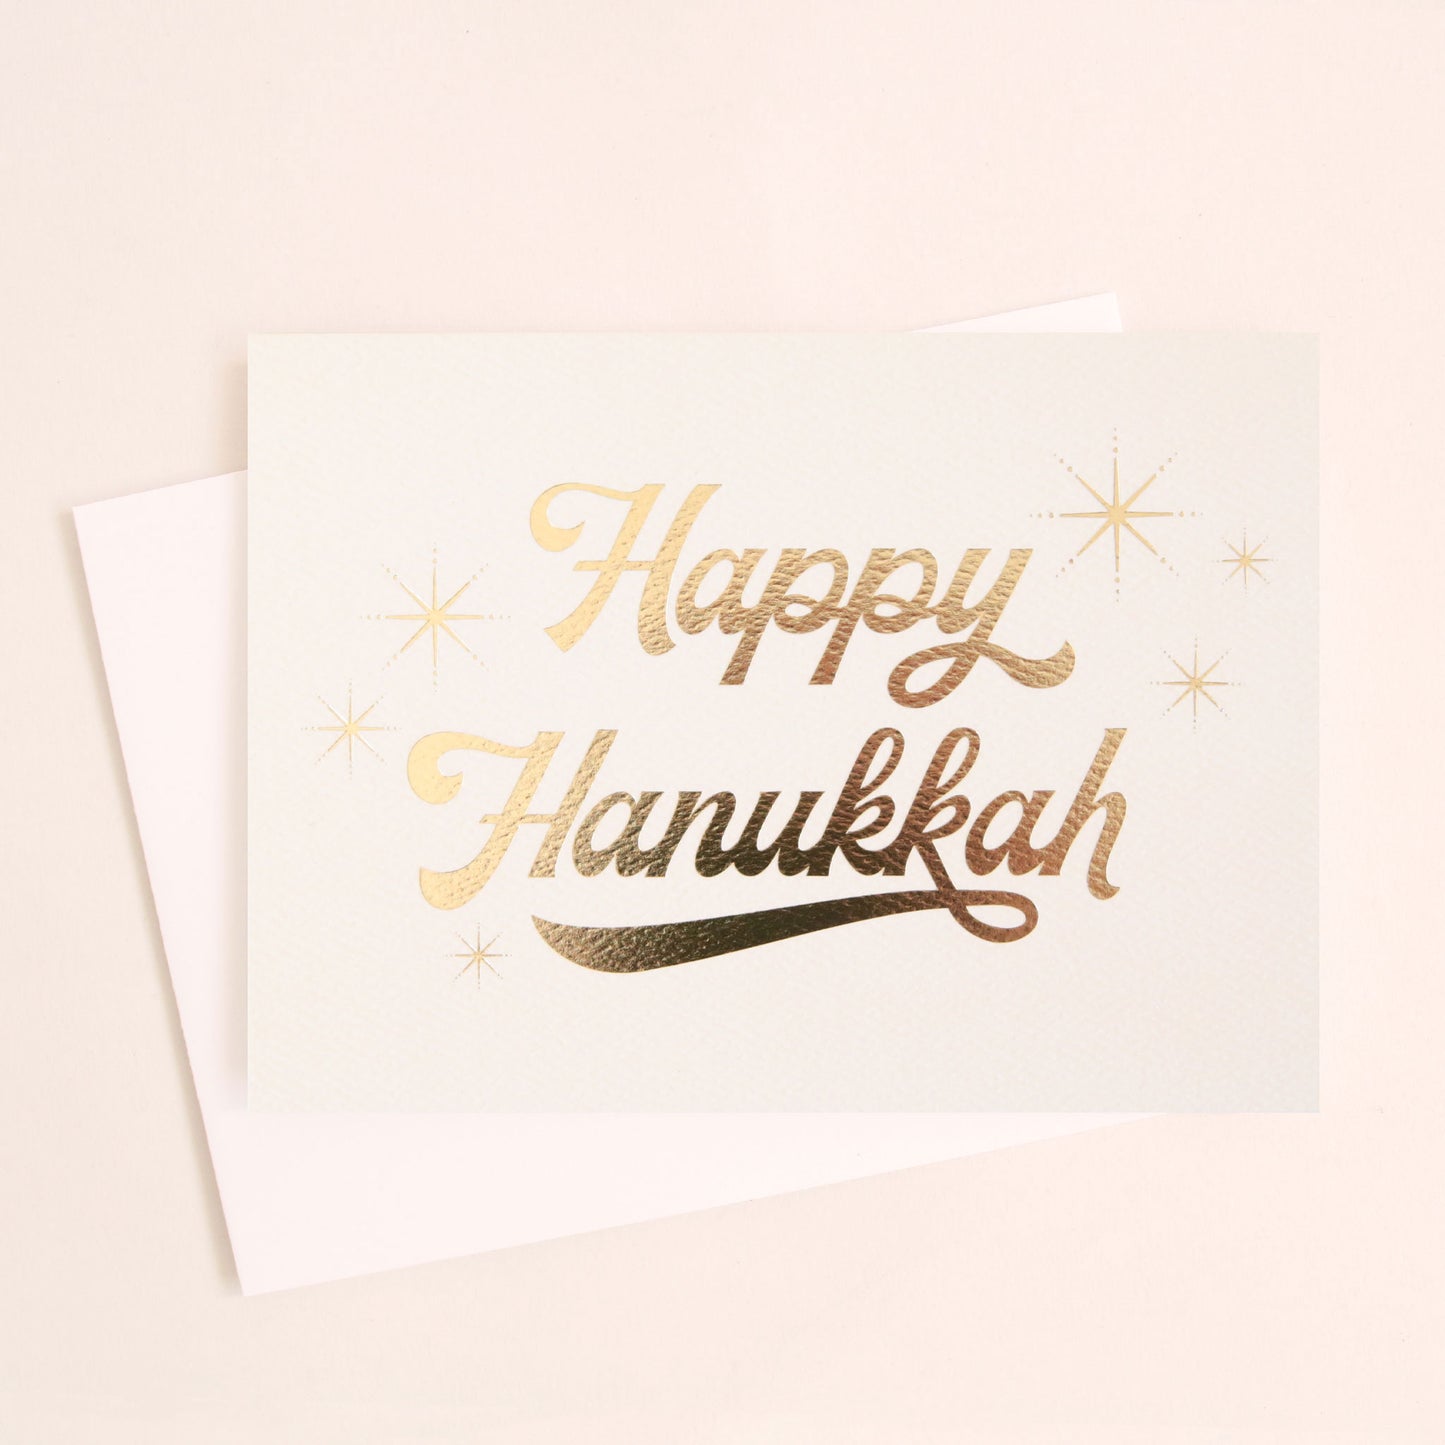 Cream greeting card that reads 'Happy Hanukkah' in gold foil cursive lettering. Gold foil stars twinkle around the text. The card is accompanied by a solid white envelope. 